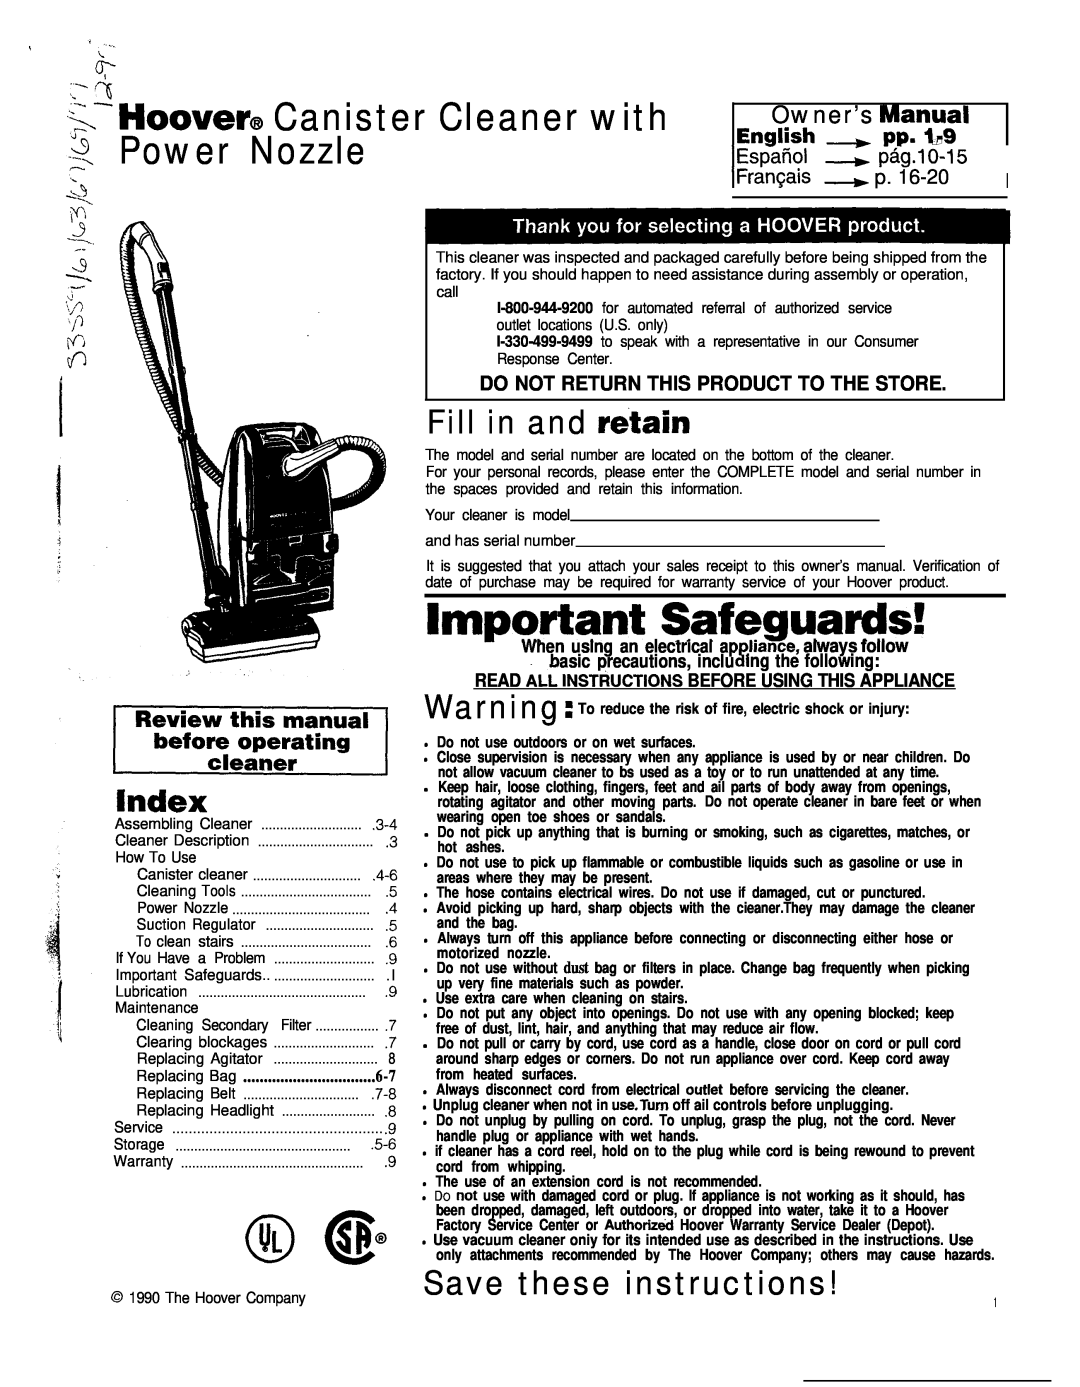 Hoover Power Nozzle warranty index, Fill in and retain, Save these instructions, Owner’s ~llugal, i,‘ fjl, Enqlish 